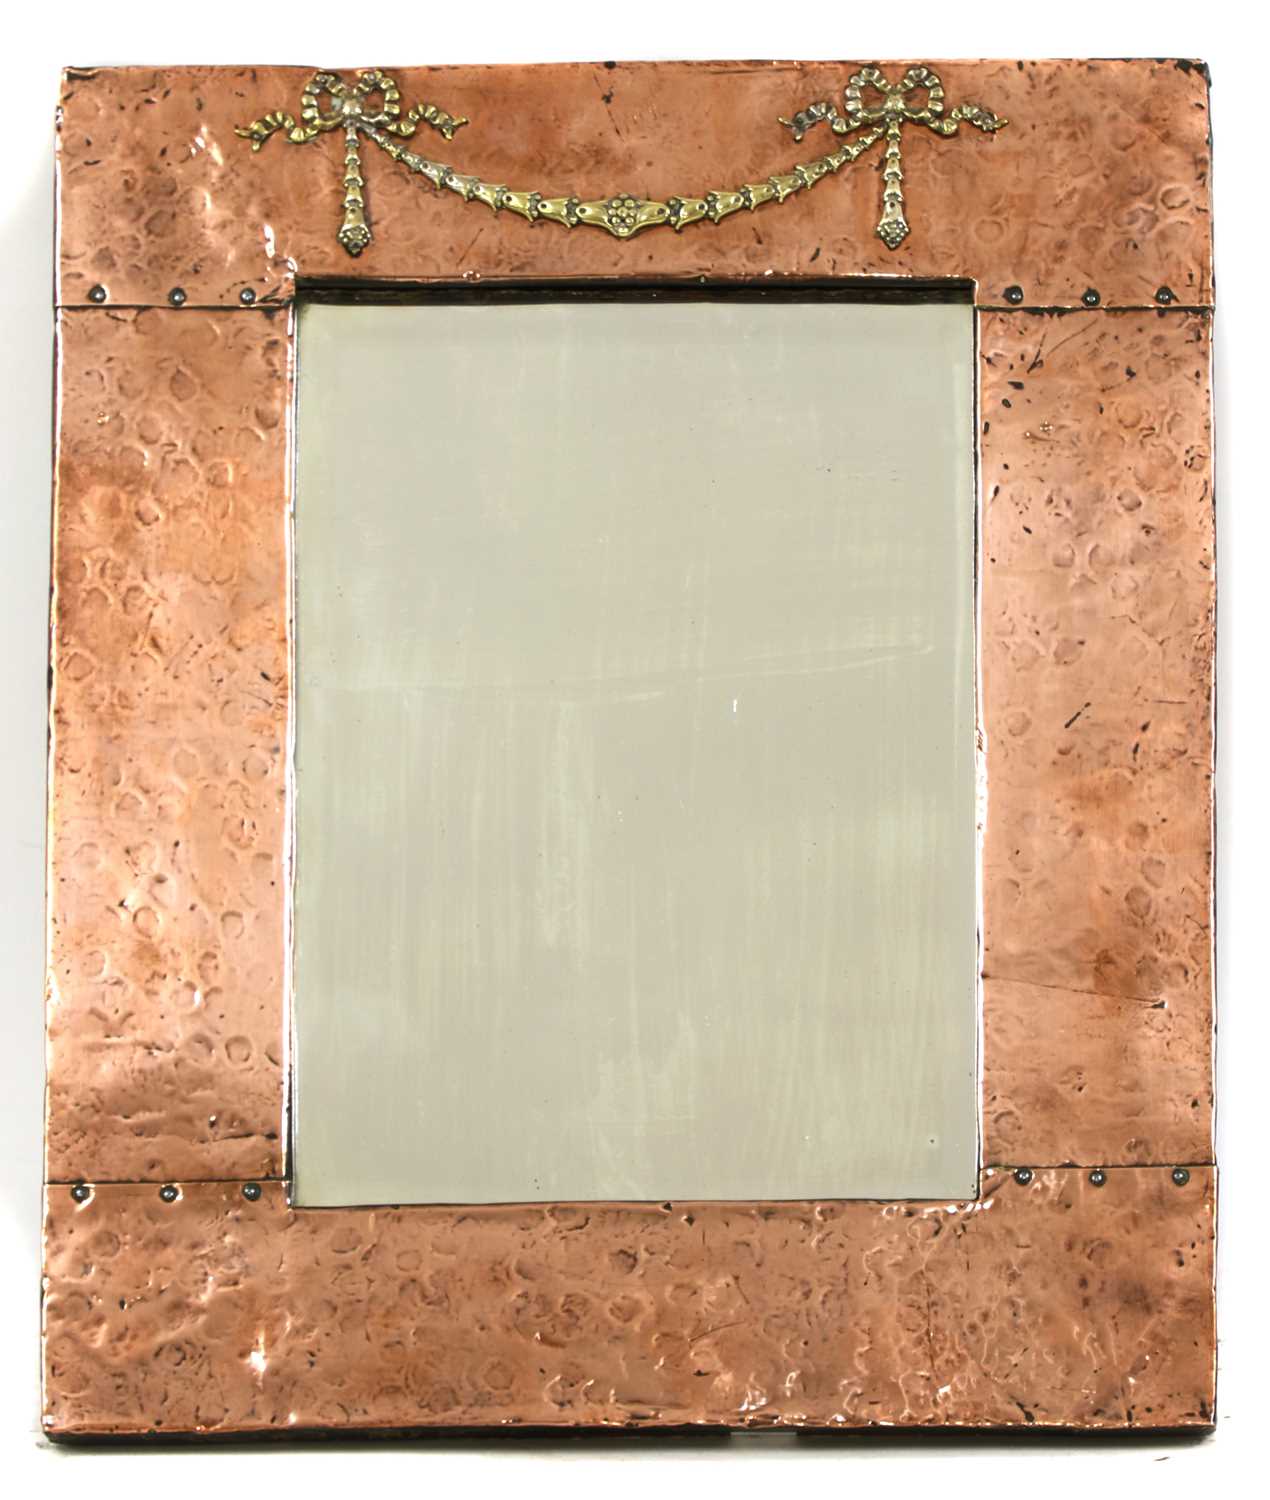 Lot 50 - An Arts and Crafts copper mirror